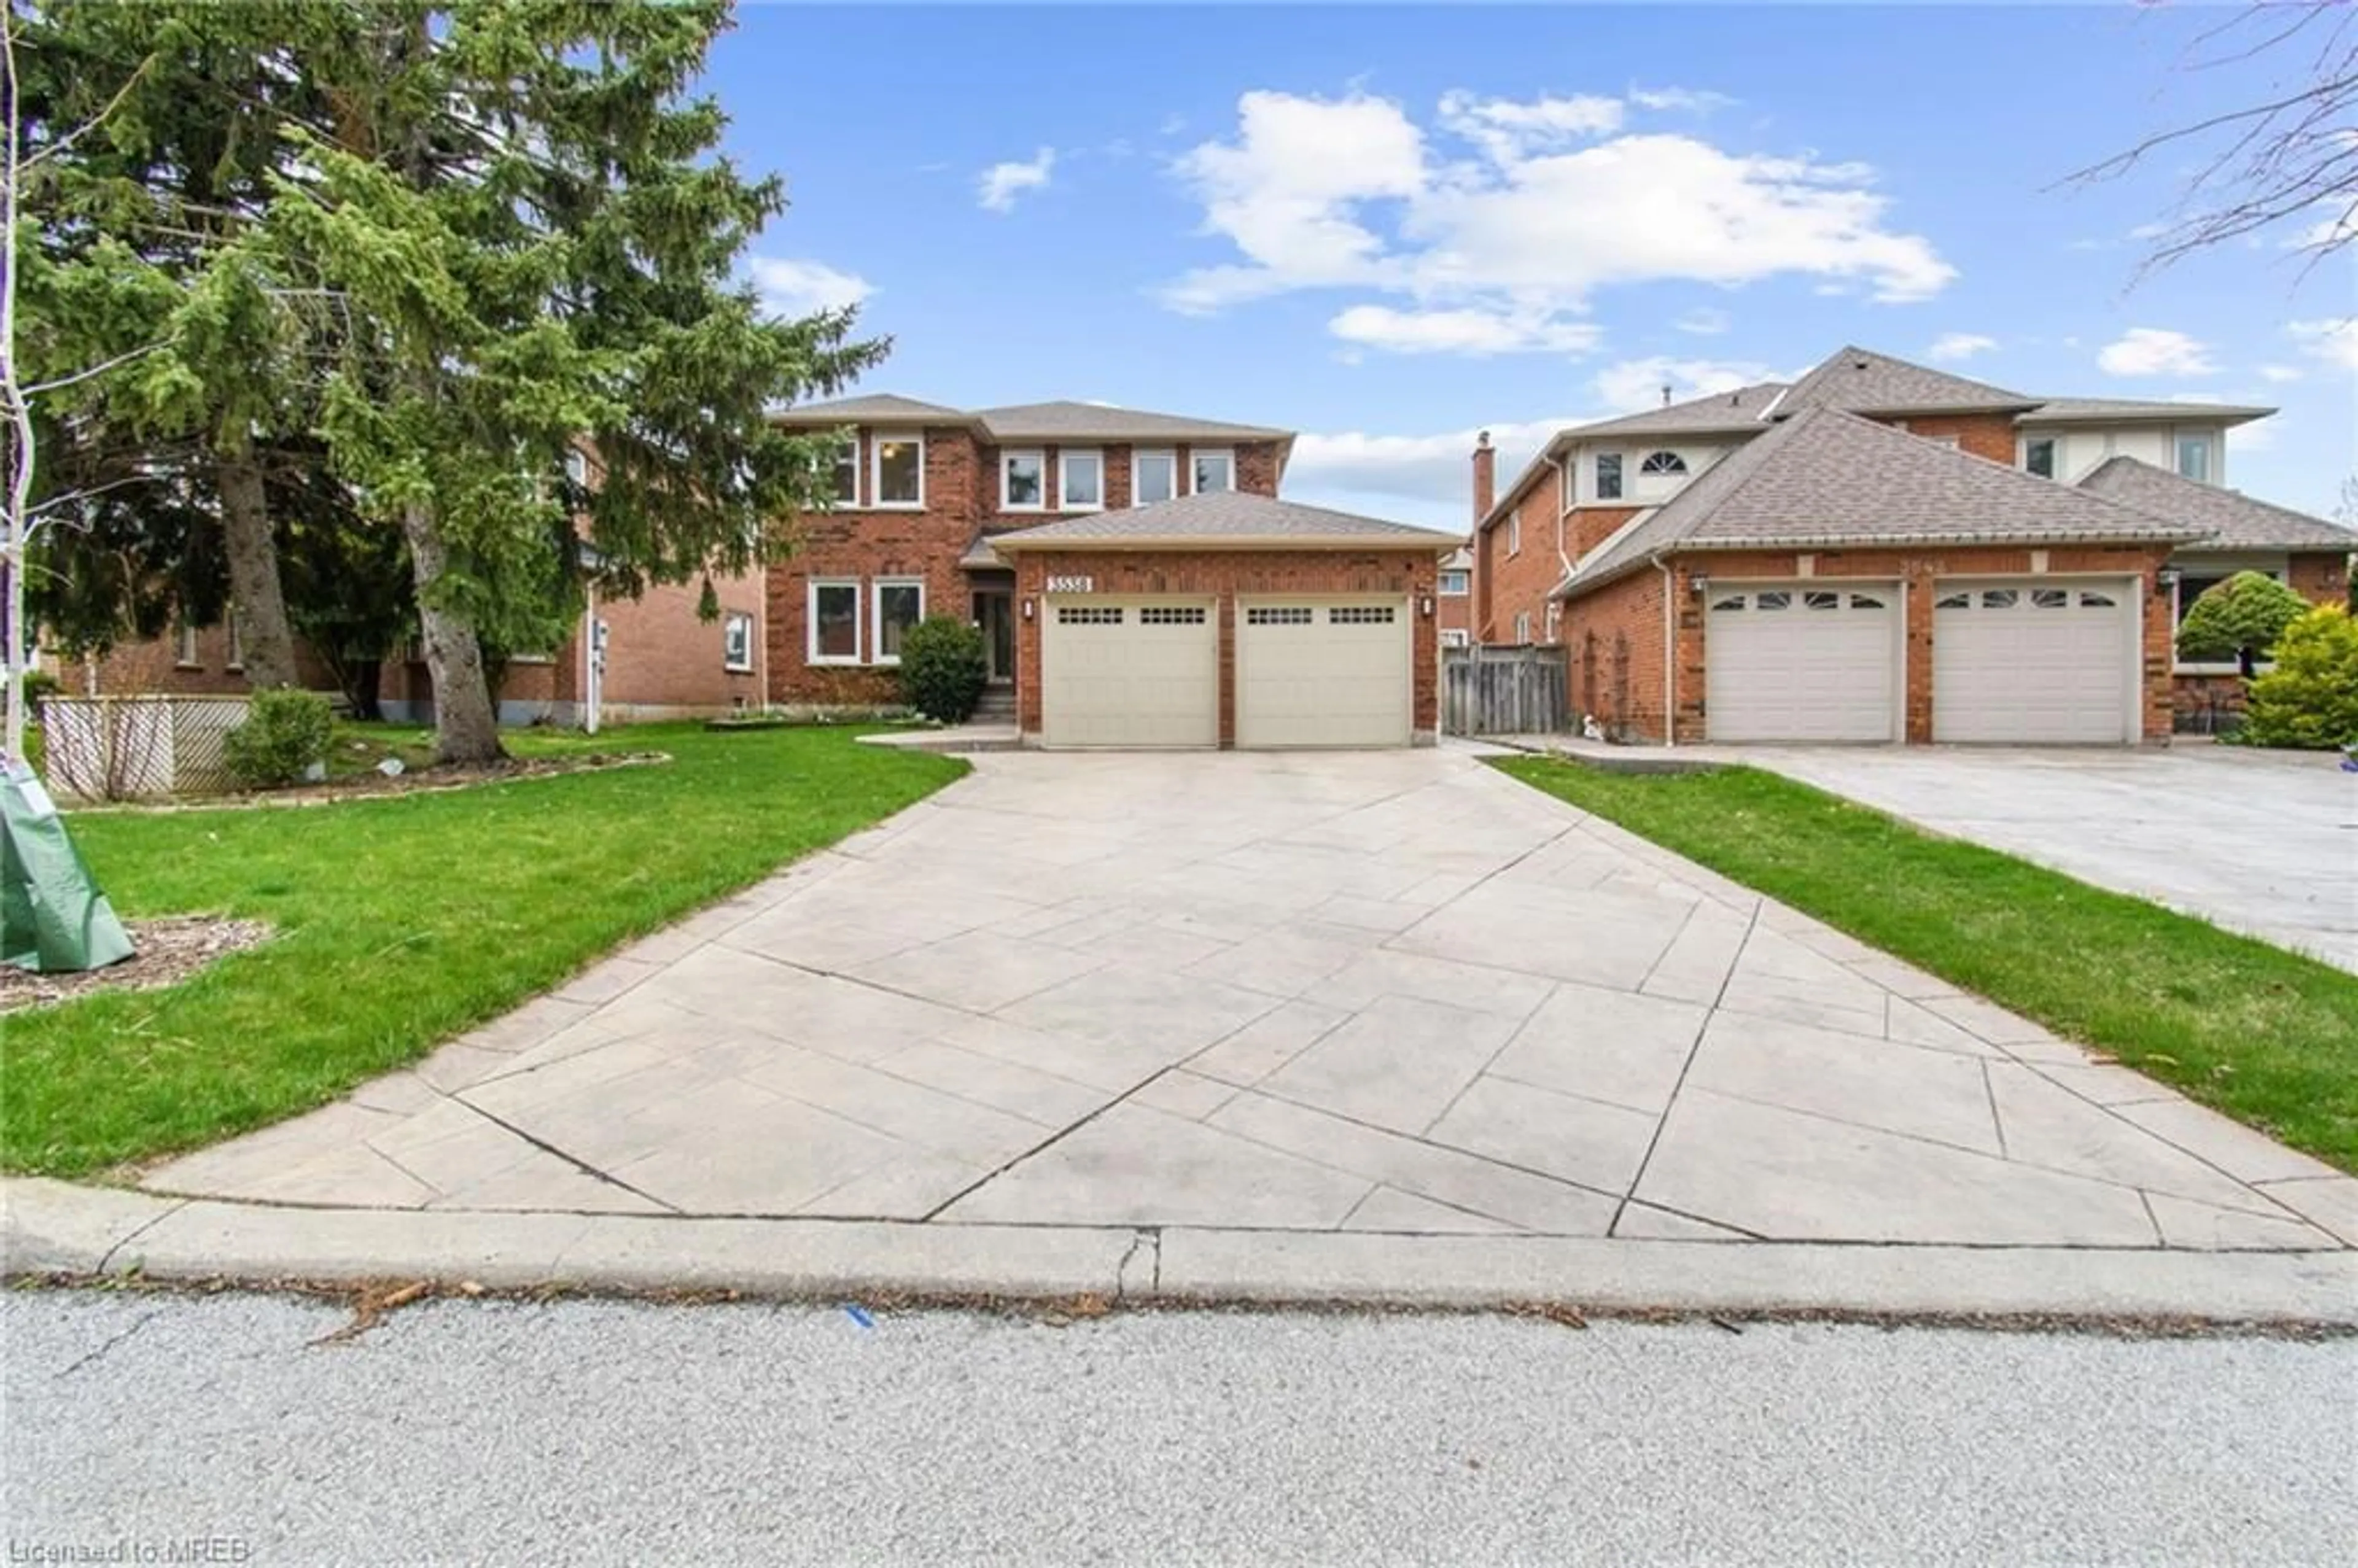 Frontside or backside of a home for 3538 Burgess Cres, Mississauga Ontario L5L 4Y8